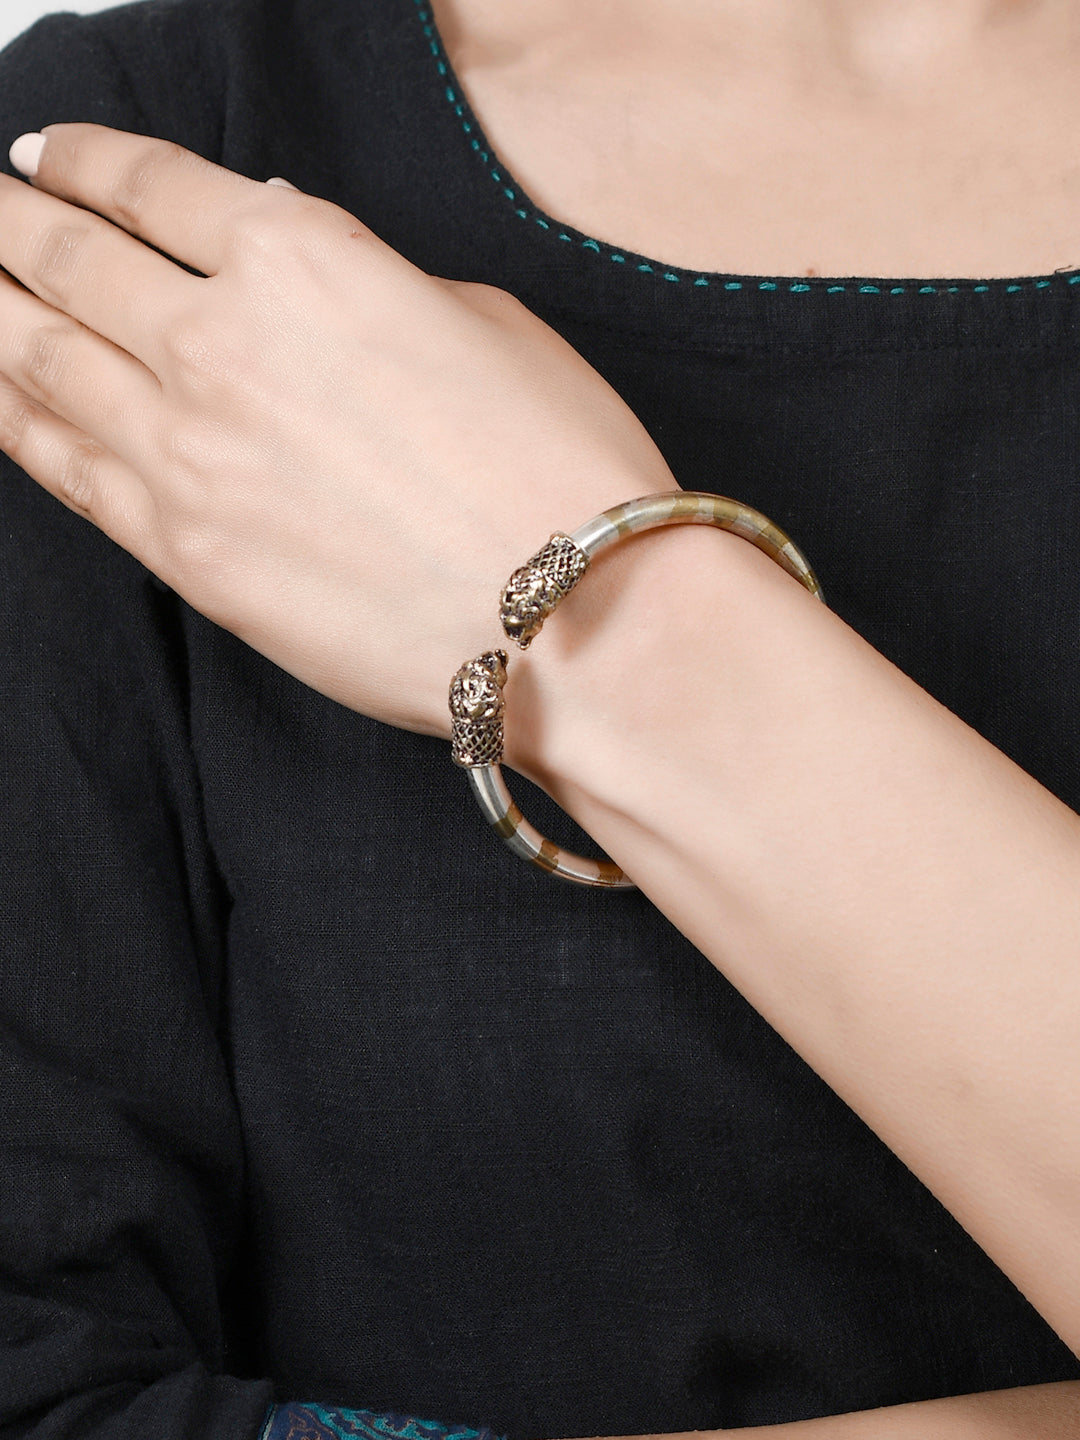 Oxidized Silver Plated Handcrafted Adjustable Bangles For Women